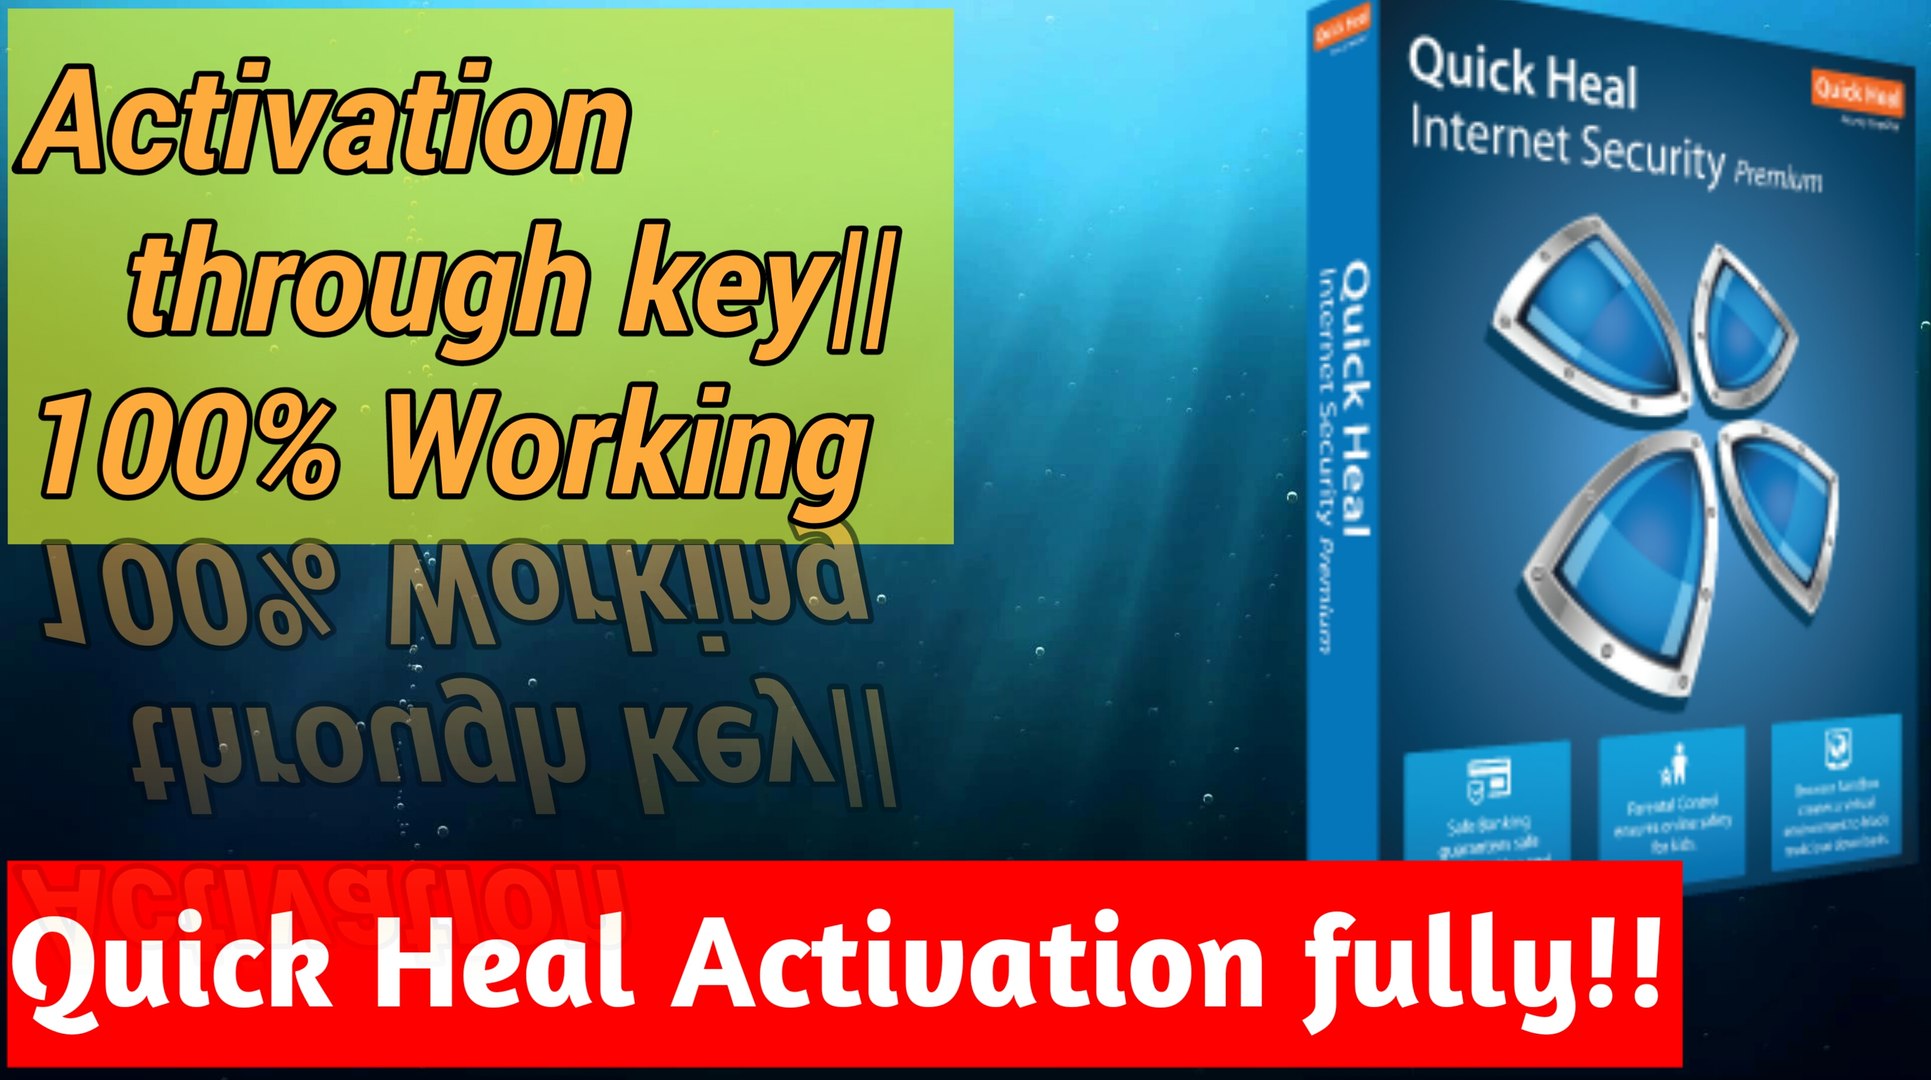 How To Activate Quick Heal Internet Security With Genuine License